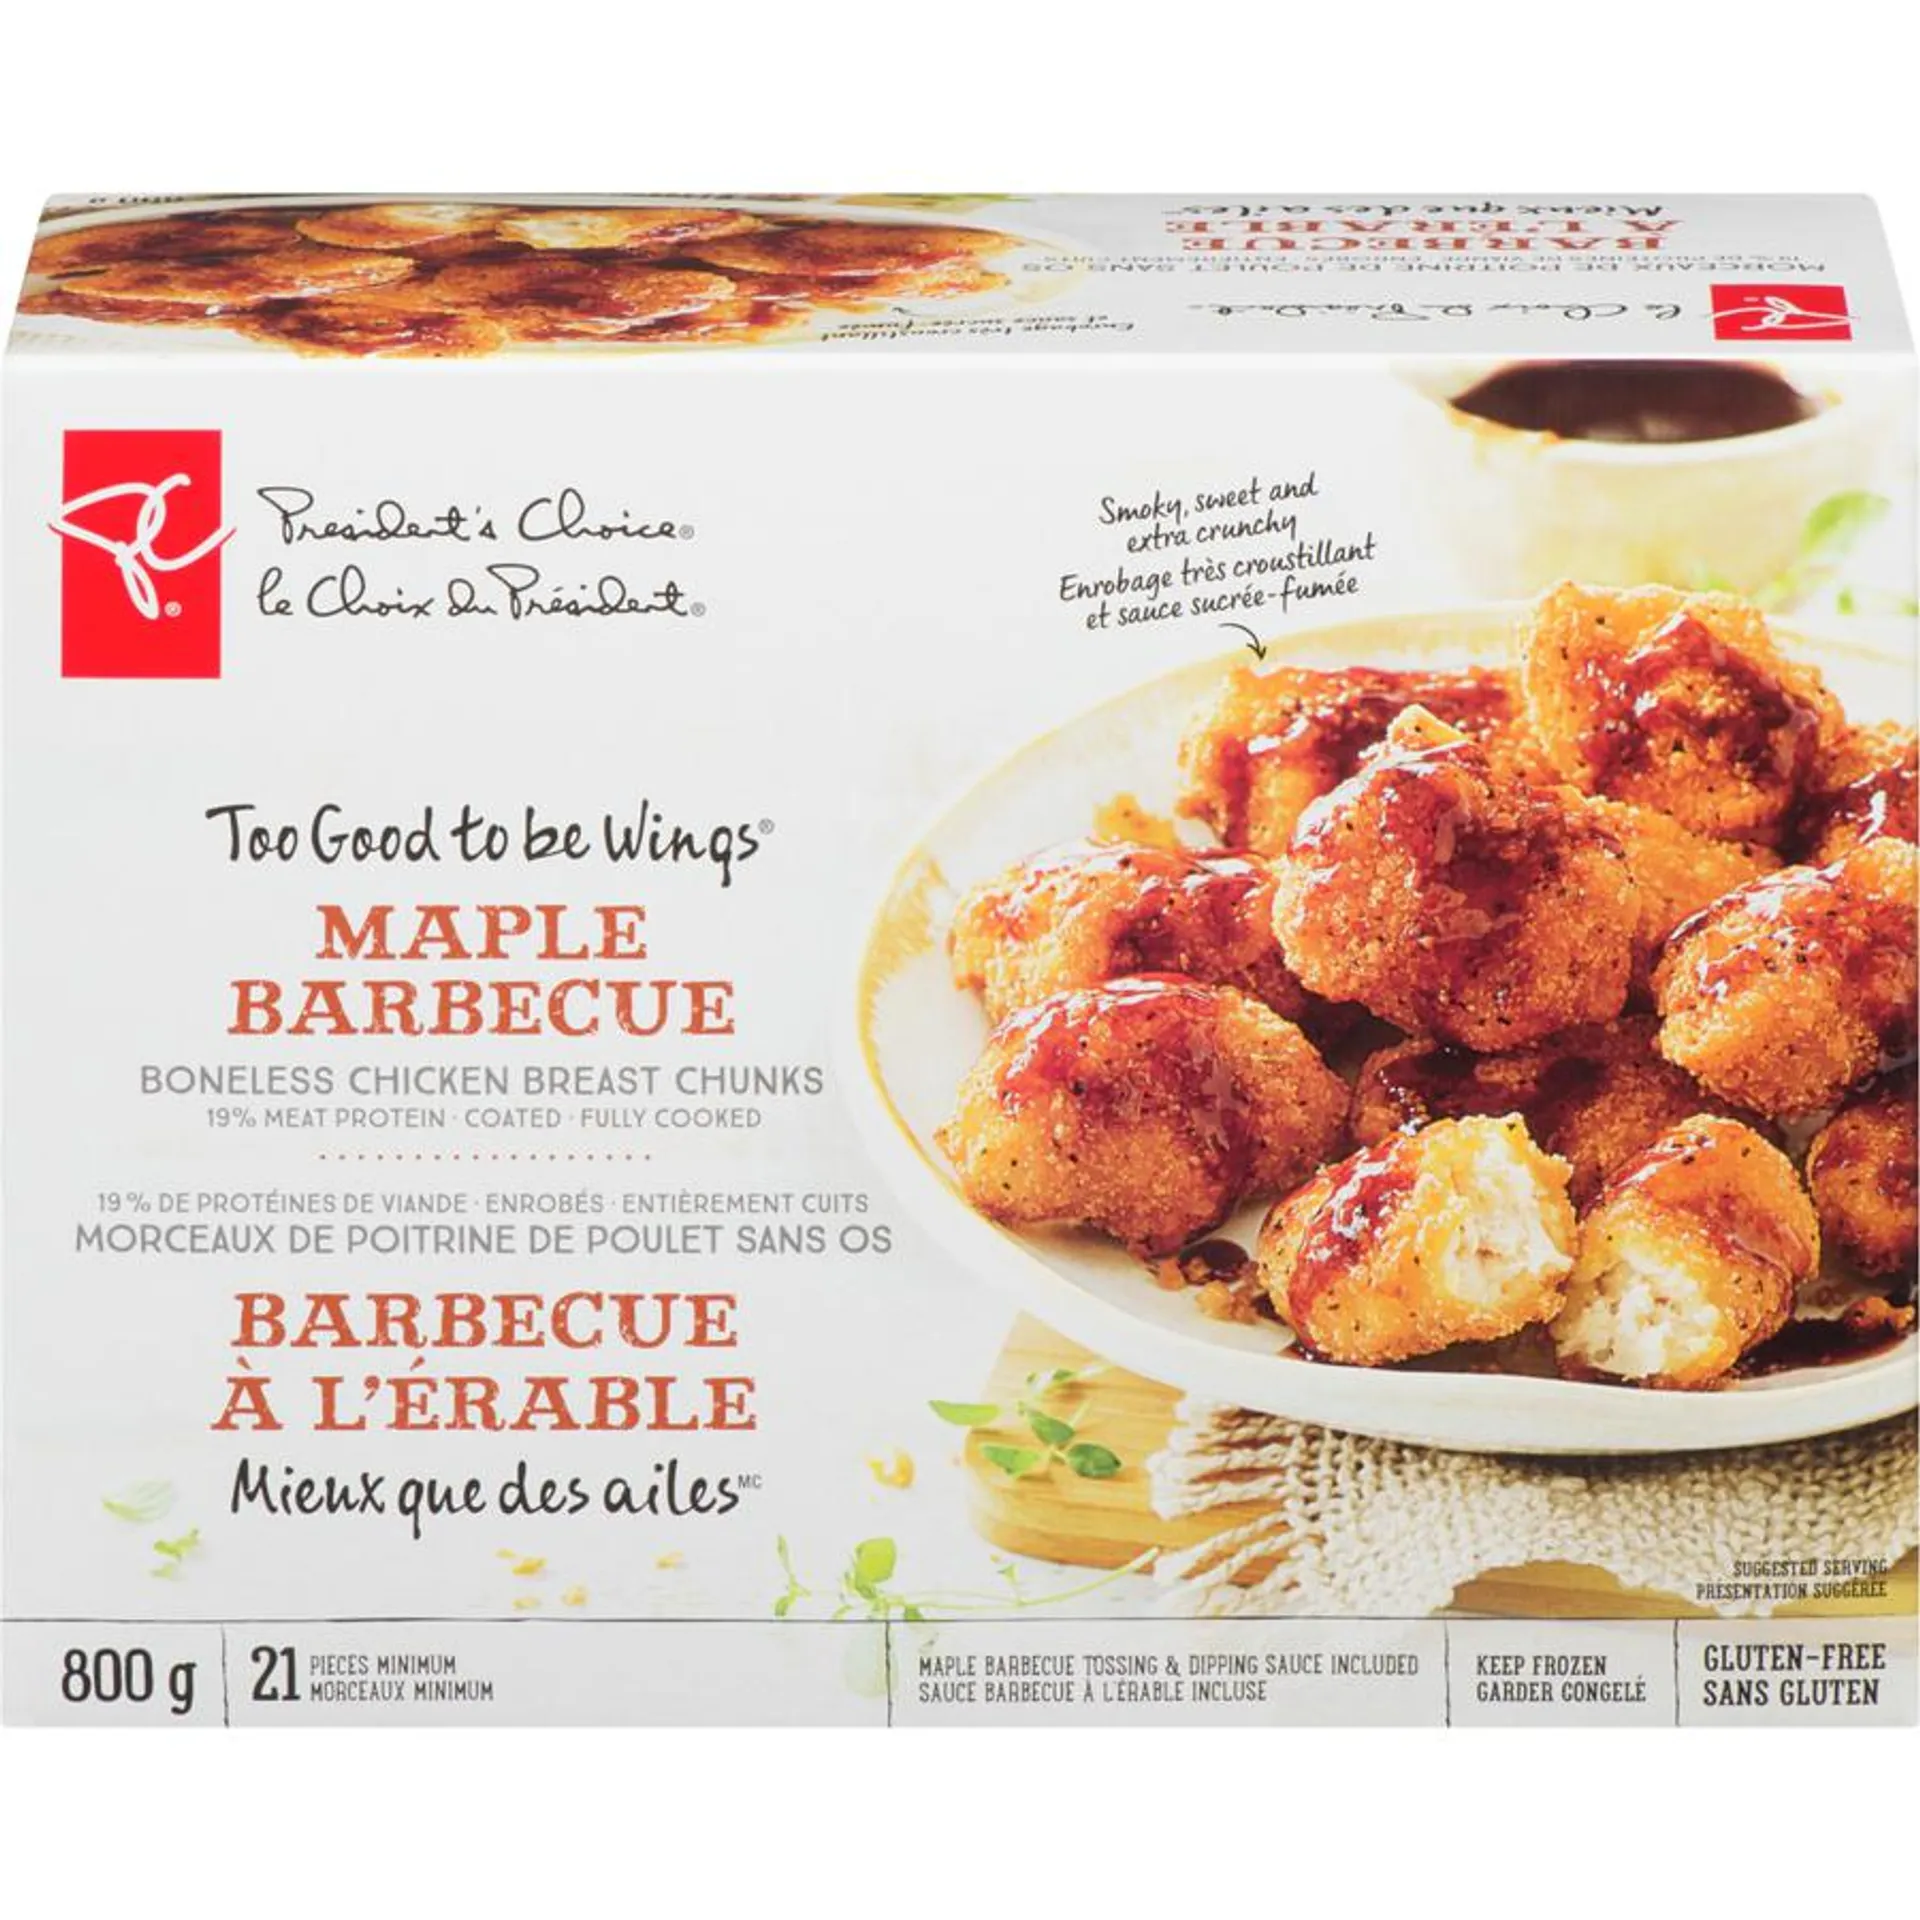 Too Good To Be Wings Maple Barbecue Boneless Coated Chicken Breast Chunks